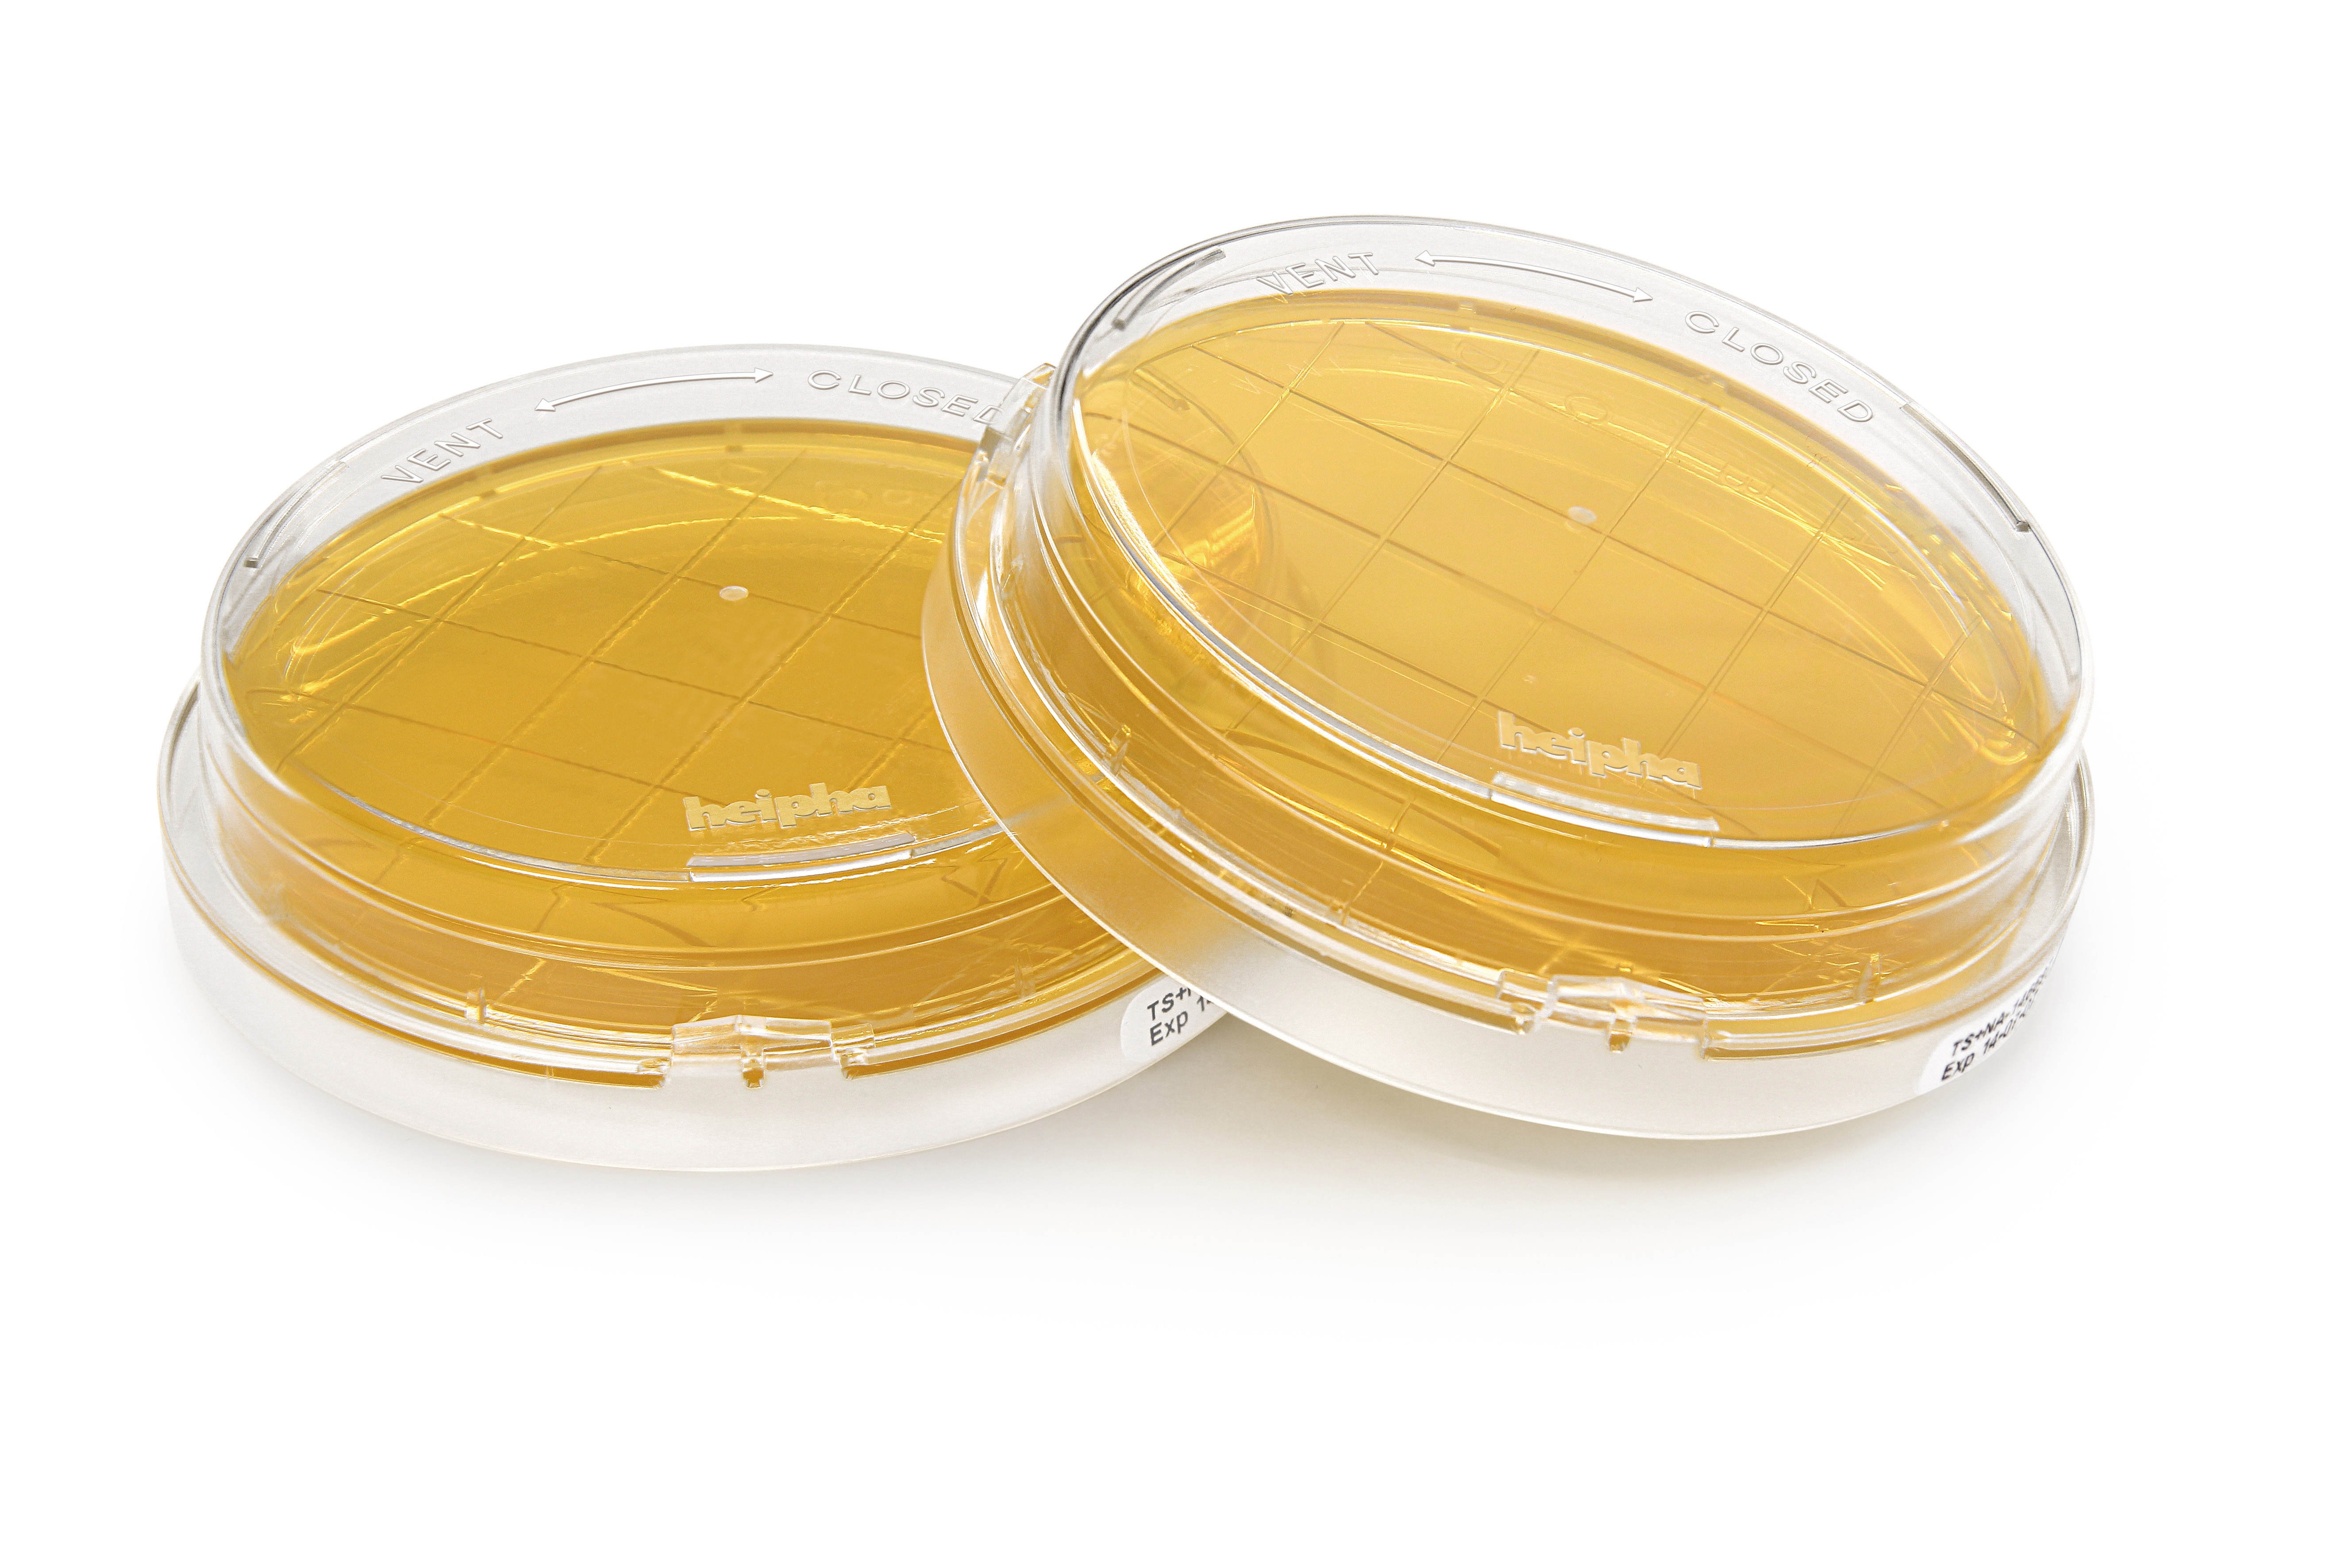 Neutralizer A Contact Plates from Merck Millipore Improve Detection of Microorganisms in Isolators and Cleanrooms